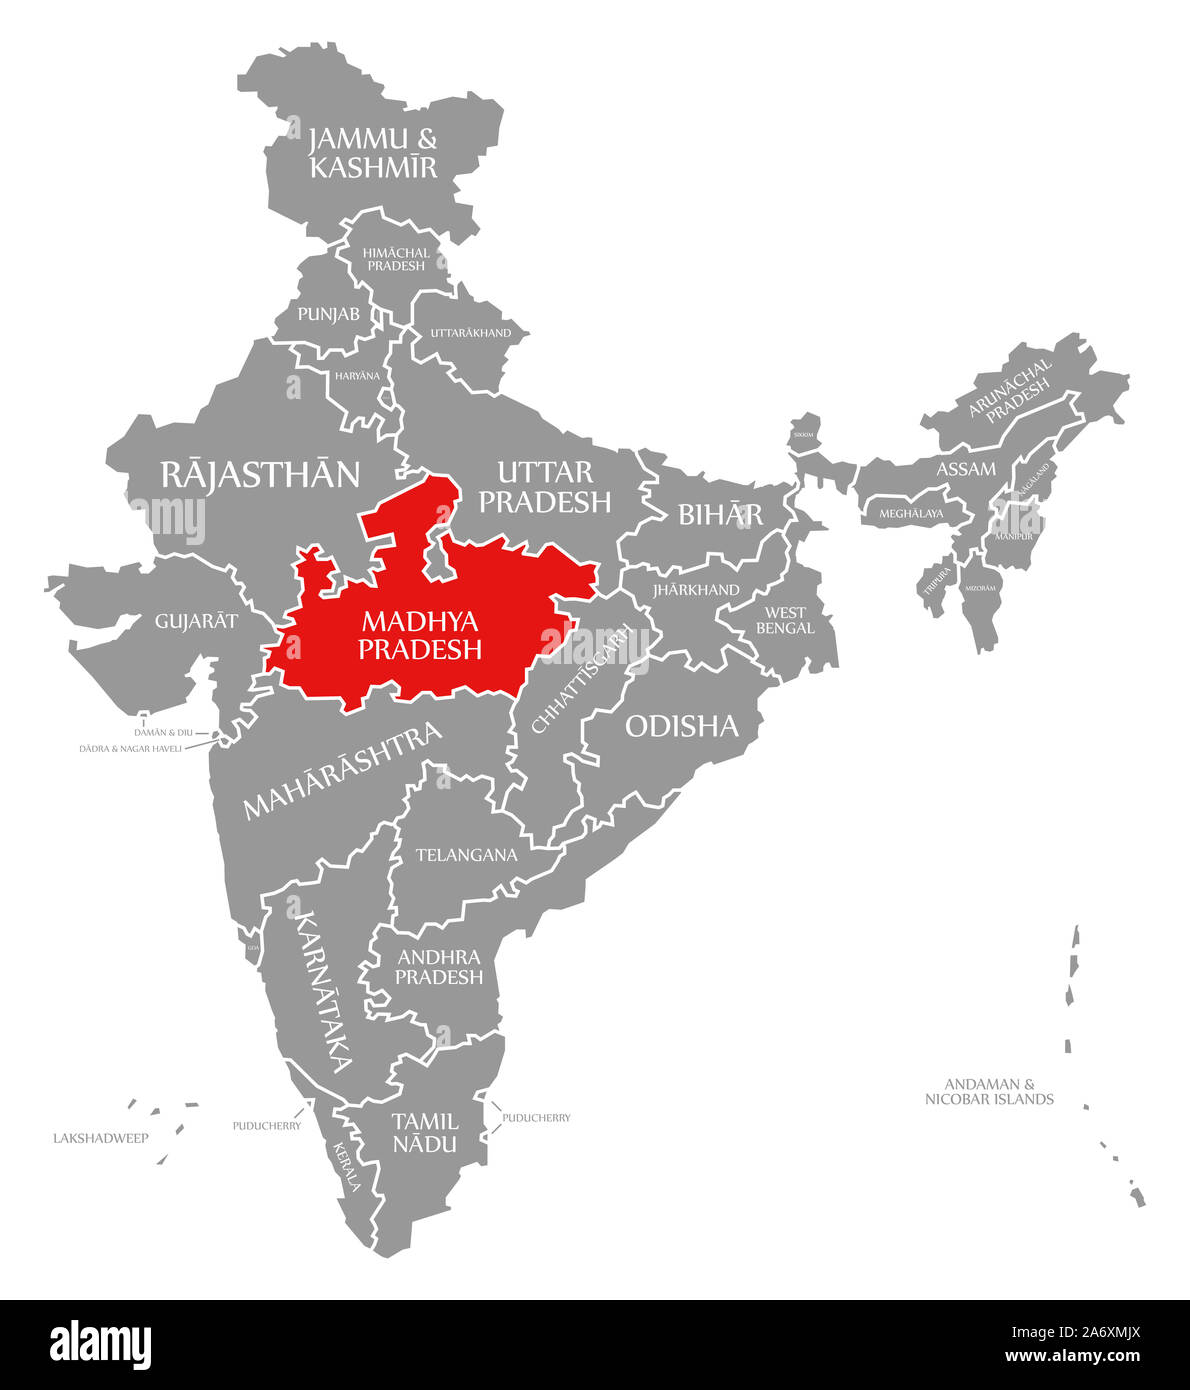 Madhya Pradesh red highlighted in map of India Stock Photo